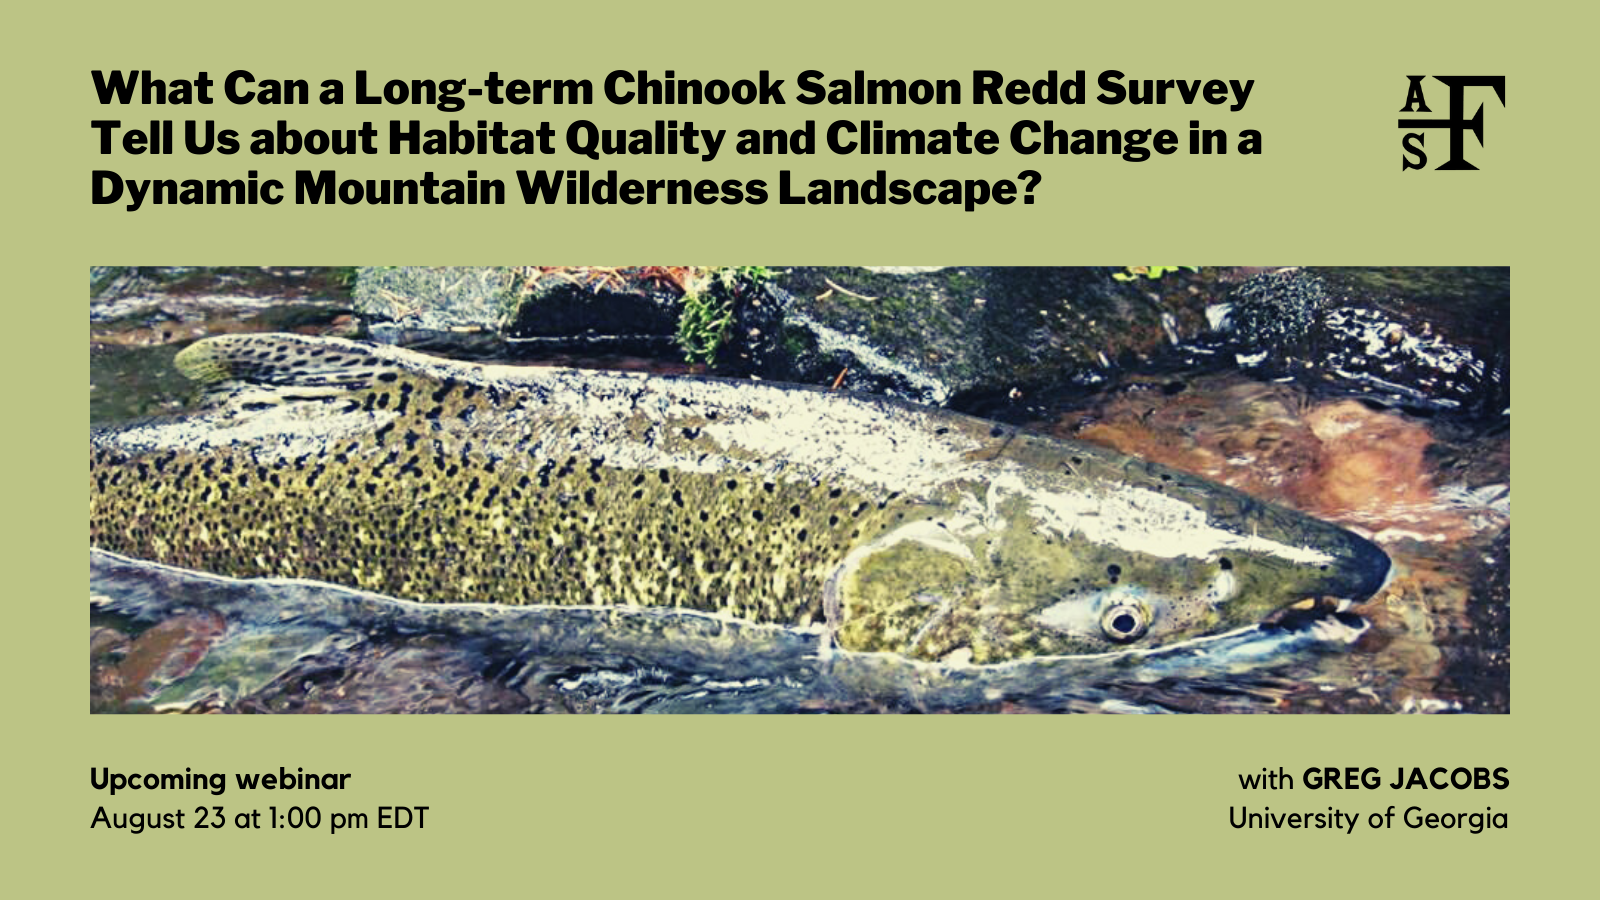 RECORDING: What Can a Long-term Chinook Salmon Redd Survey Tell Us about Habitat Quality & Climate Change in a Dynamic Mountain Wilderness